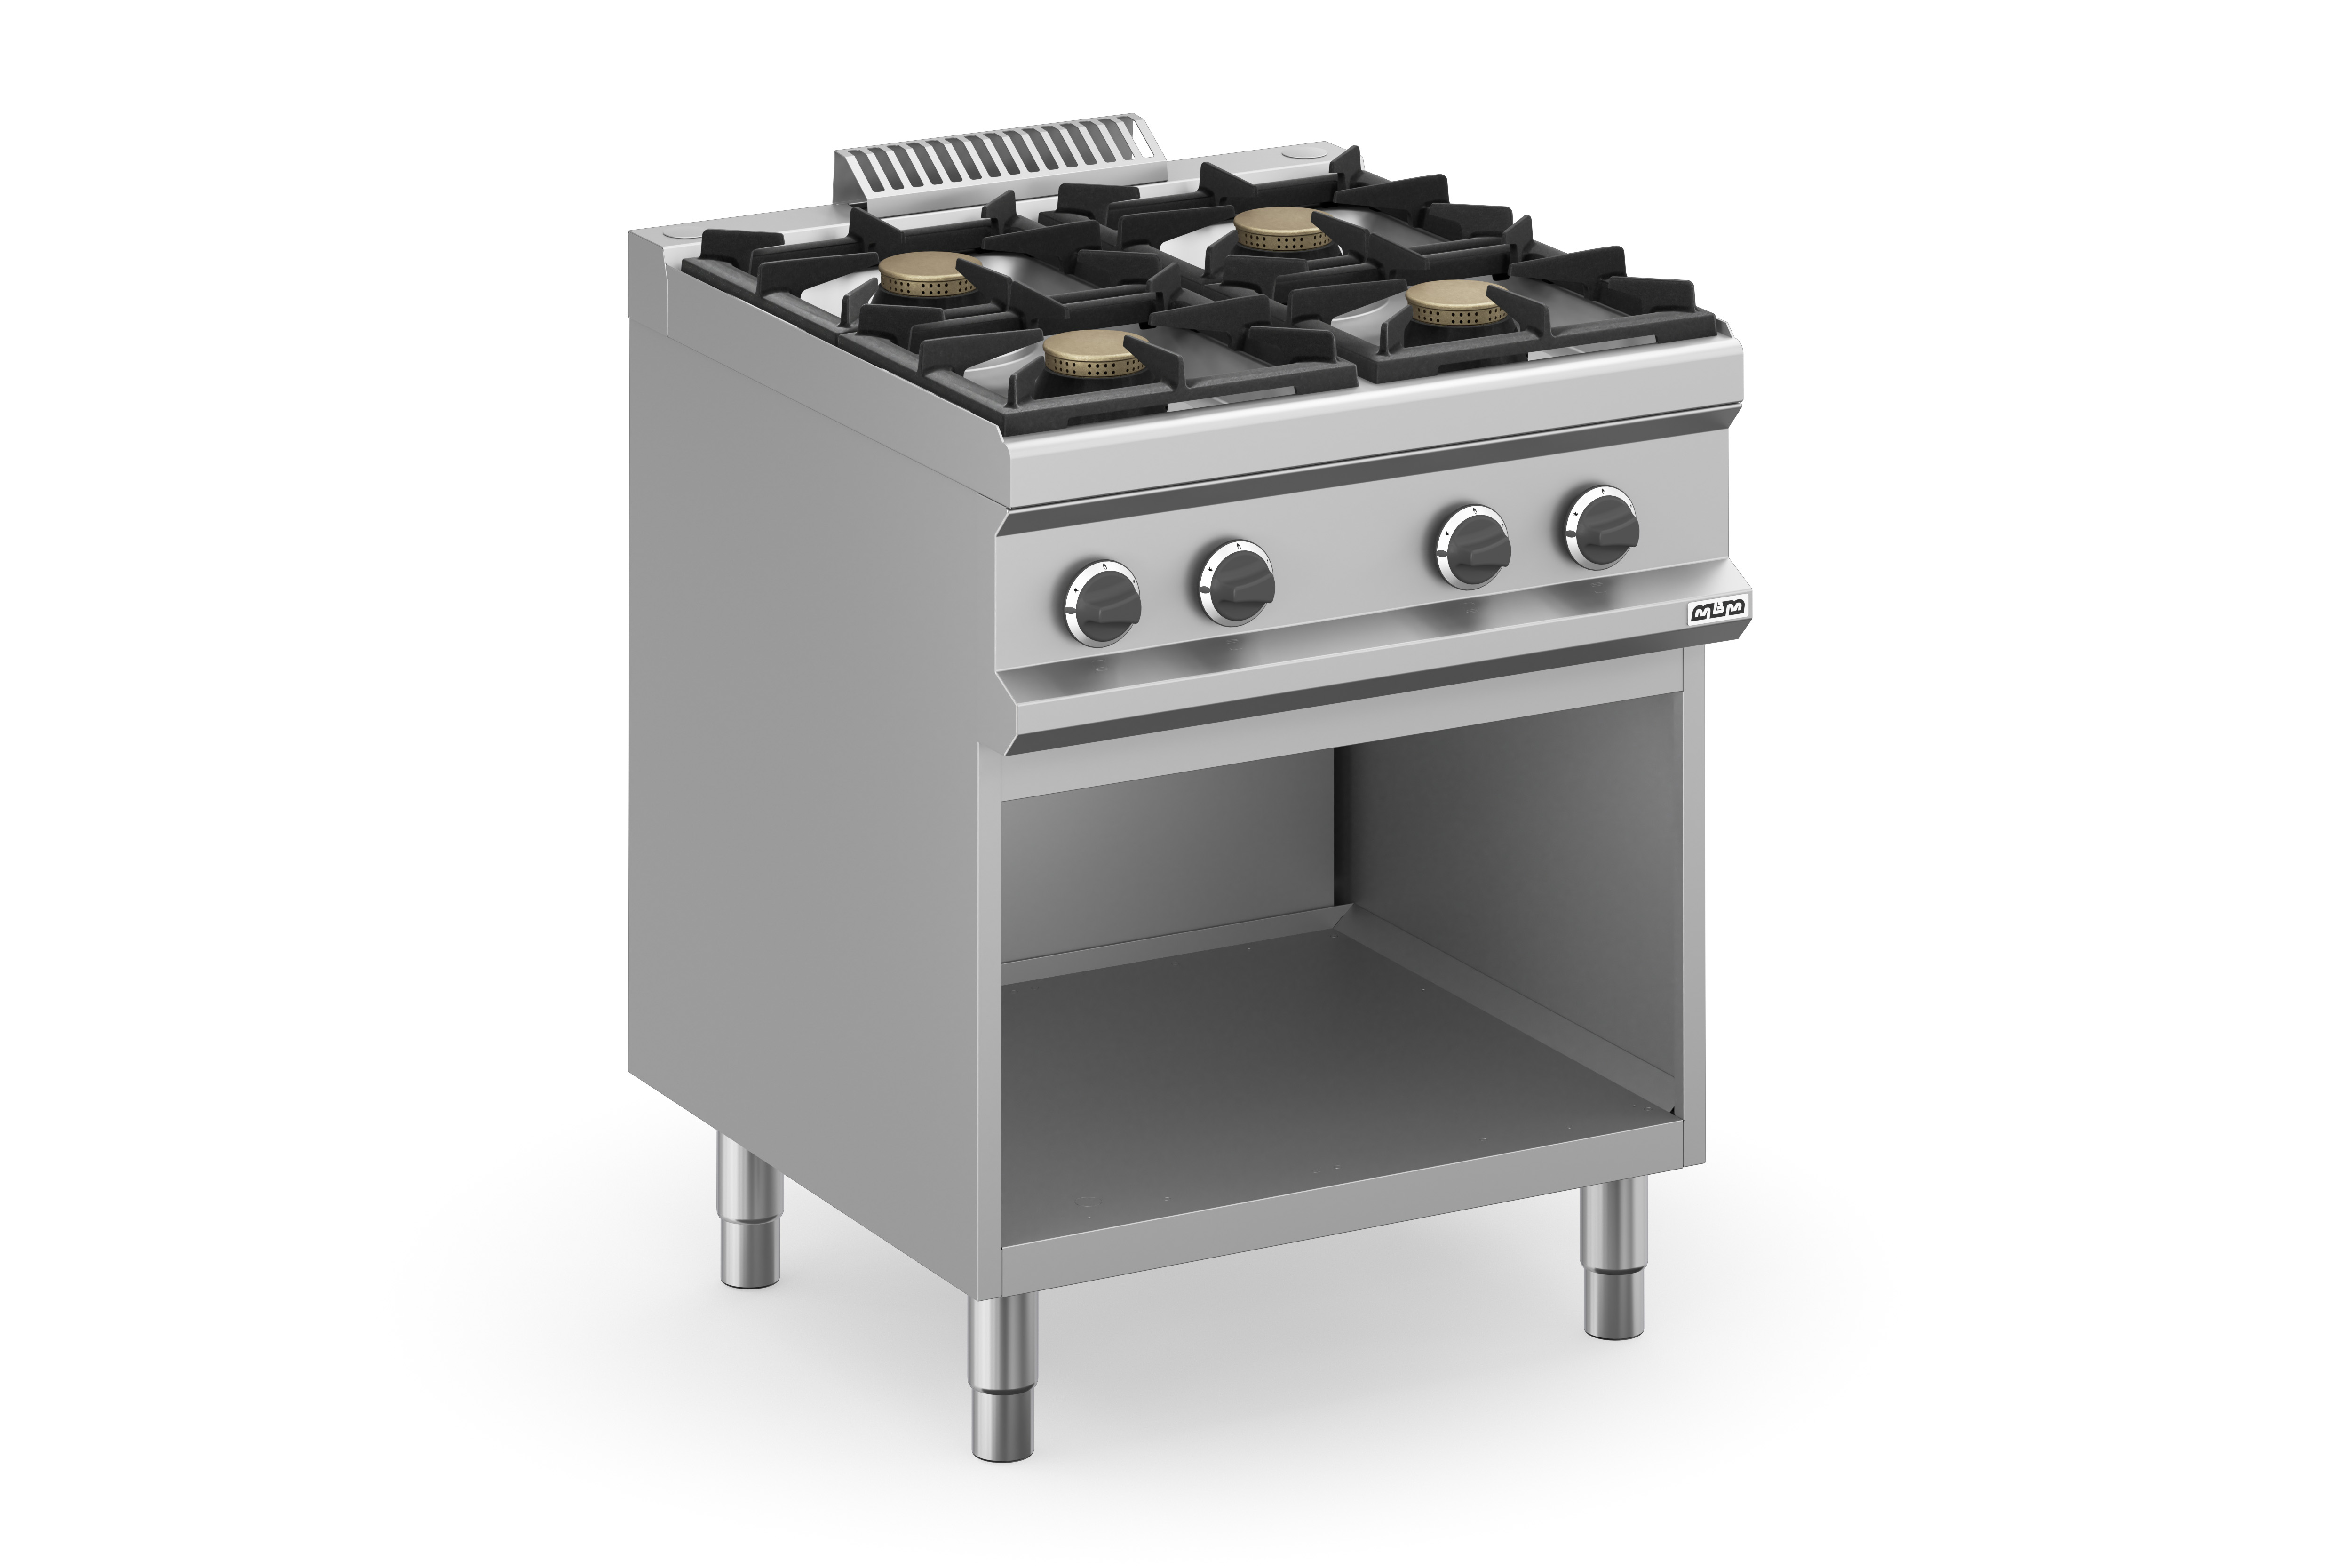 Magistra Plus 700 MFB77AXL 4 Burners Gas Cooker with Open Base